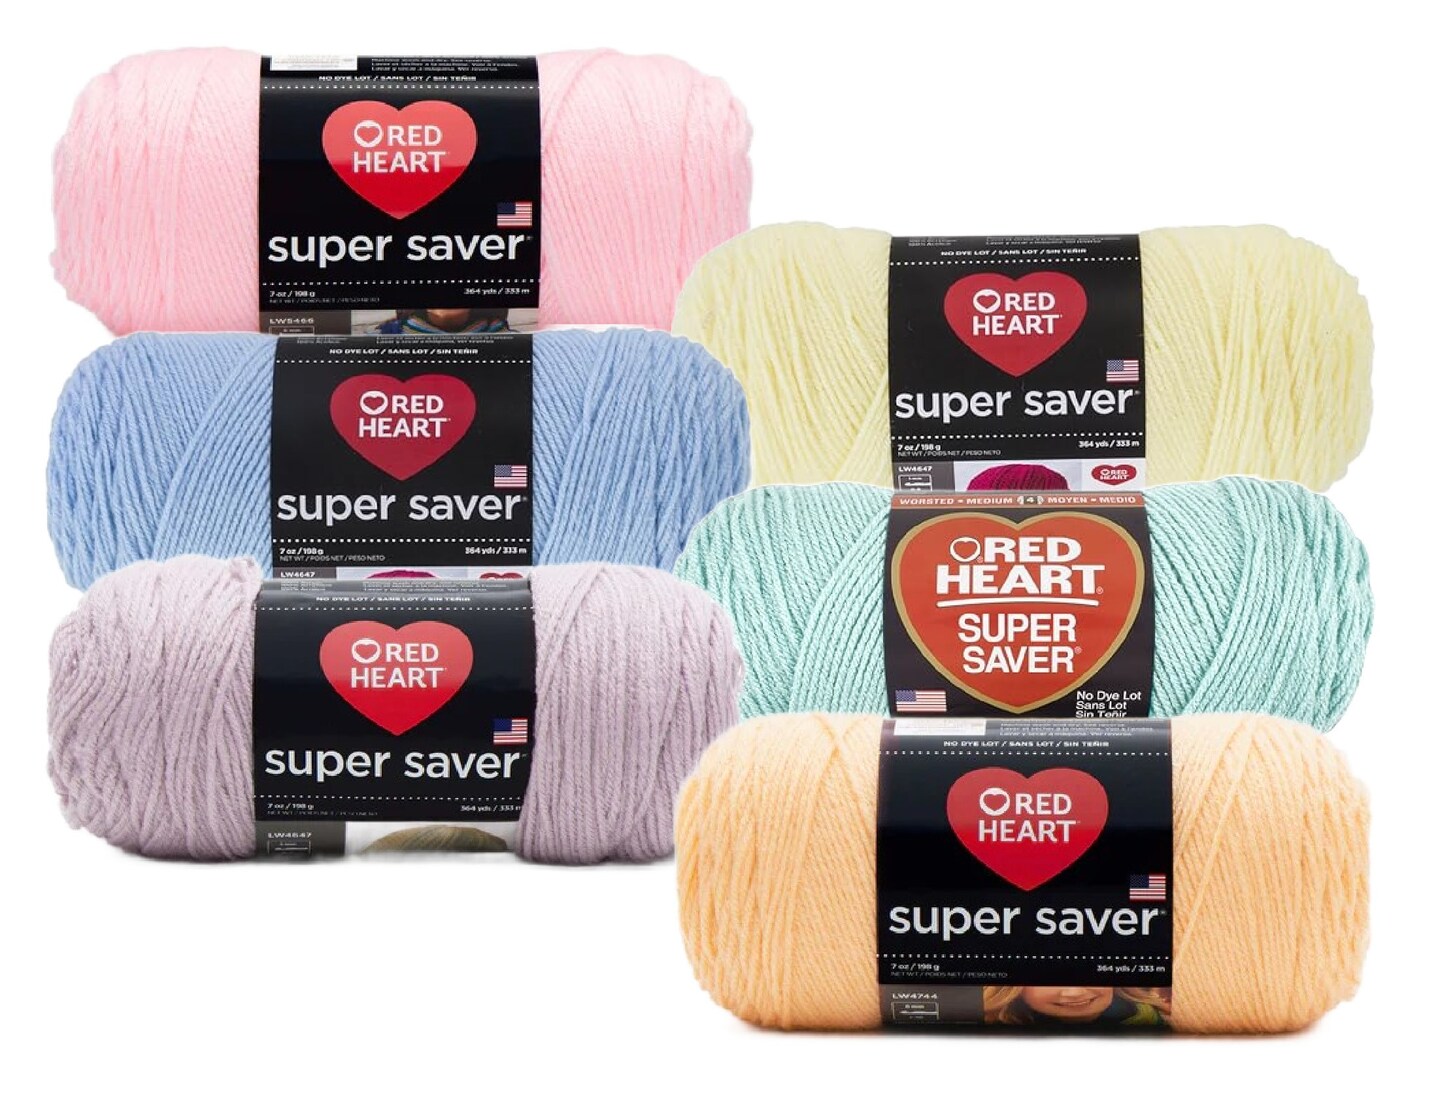 Red Heart - Super Saver Yarn - 6 Balls Assorted Colors (Pastels)